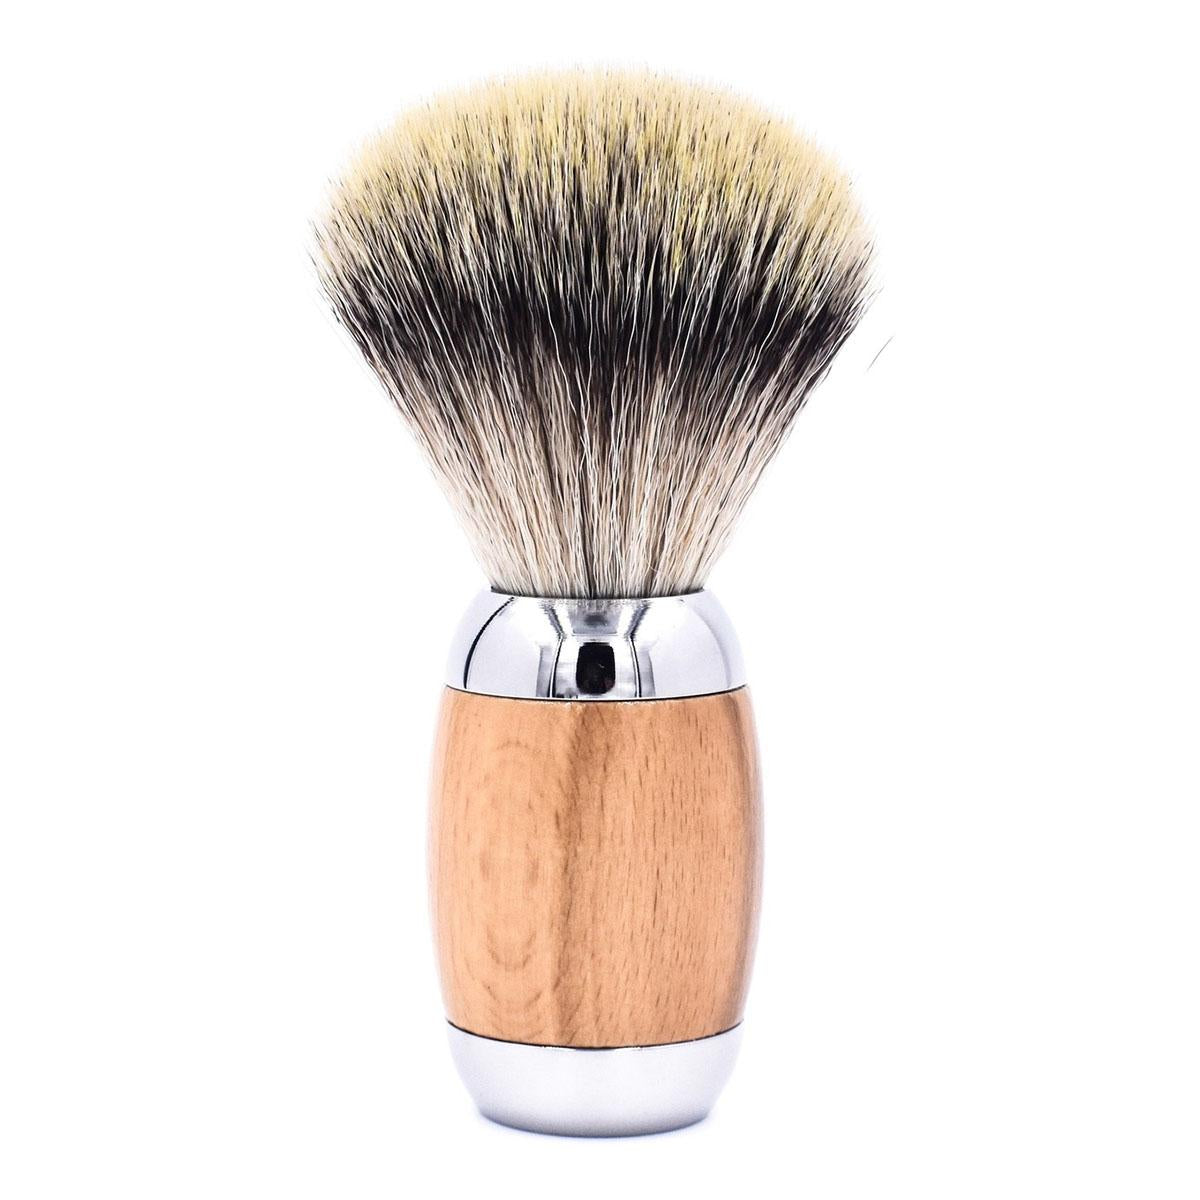 Primary image of Beechwood Shave Brush w/ Stand